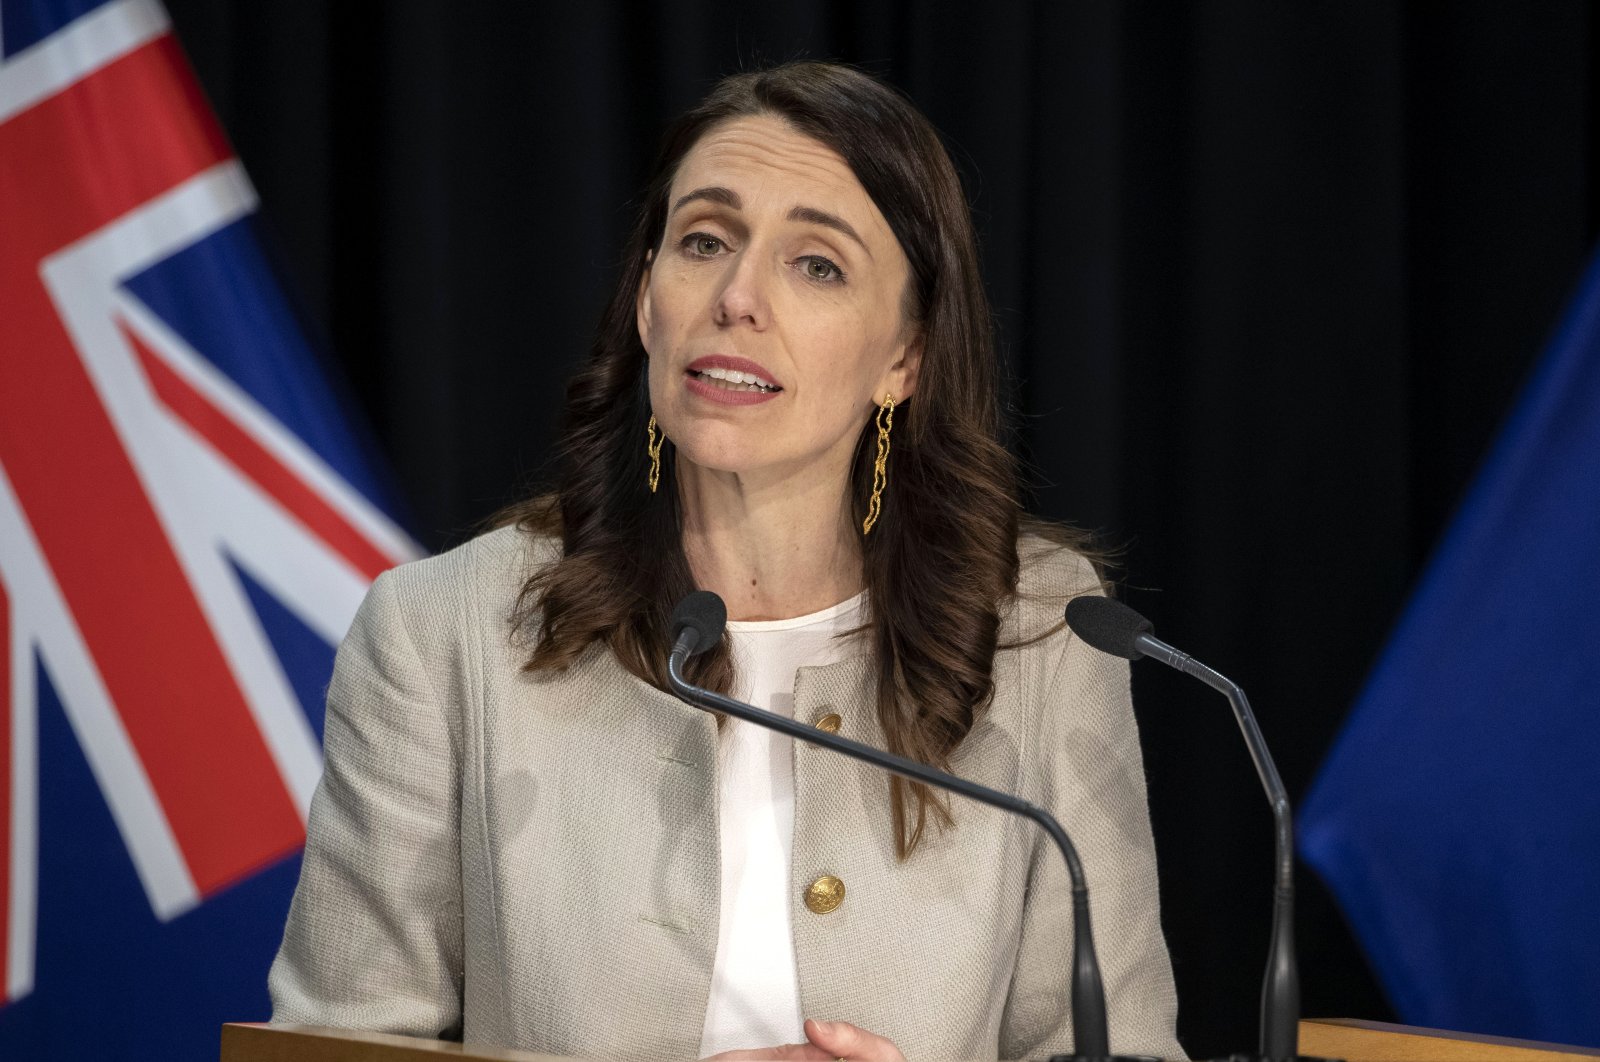 New Zealand Prime Minister Jacinda Ardern reacts during a press conference in Wellington, New Zealand, Aug. 14, 2020. (AP Photo)